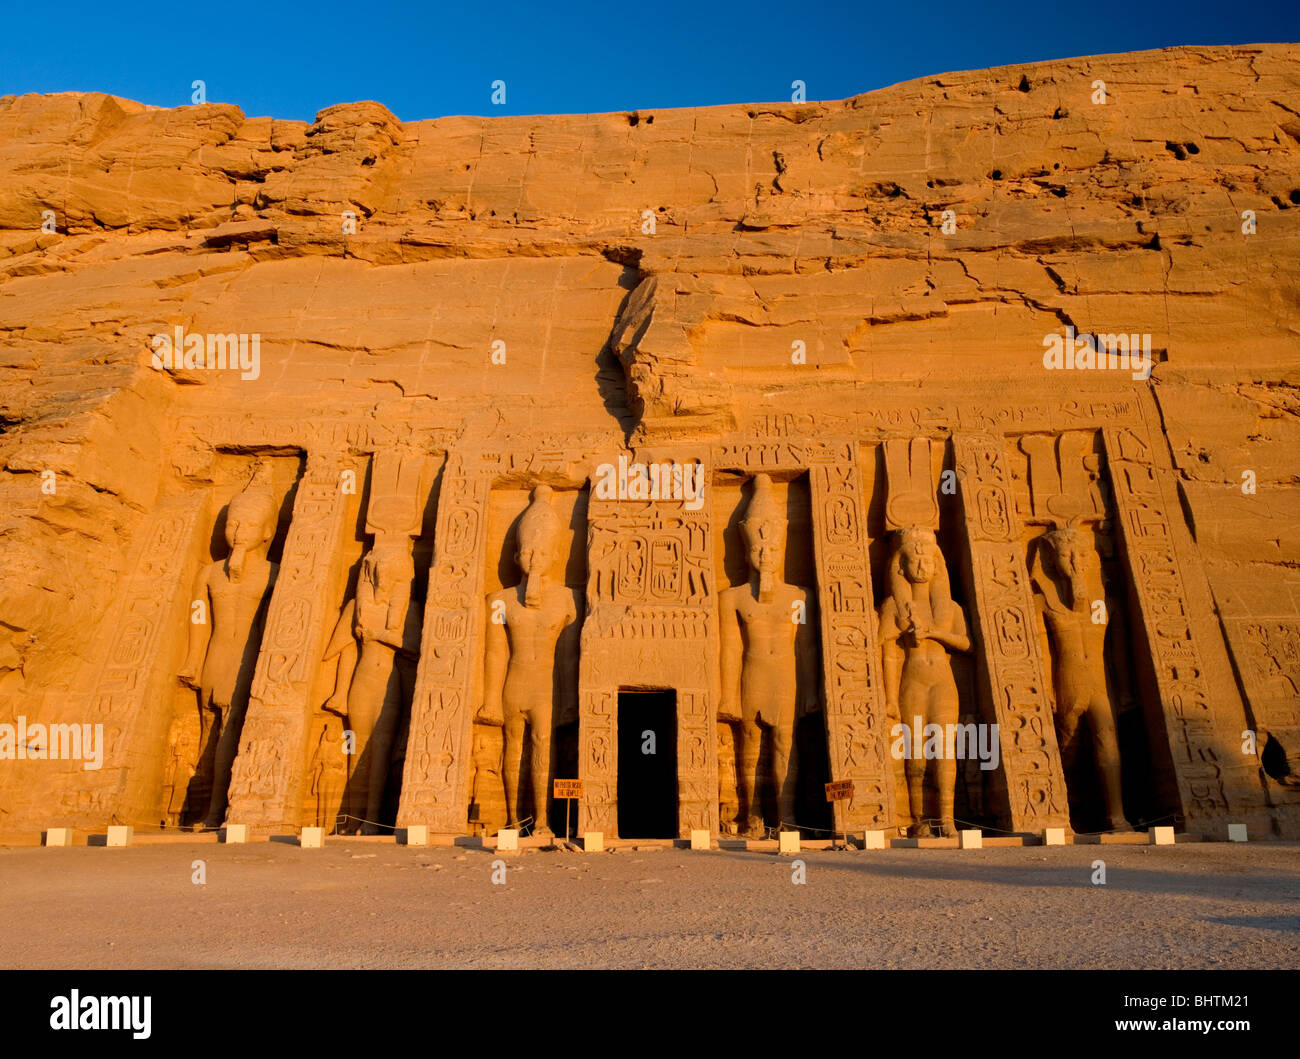 Carved statues Guarding the great temple of Hathor at sunrise, Abu Simbel, Egypt. Stock Photo